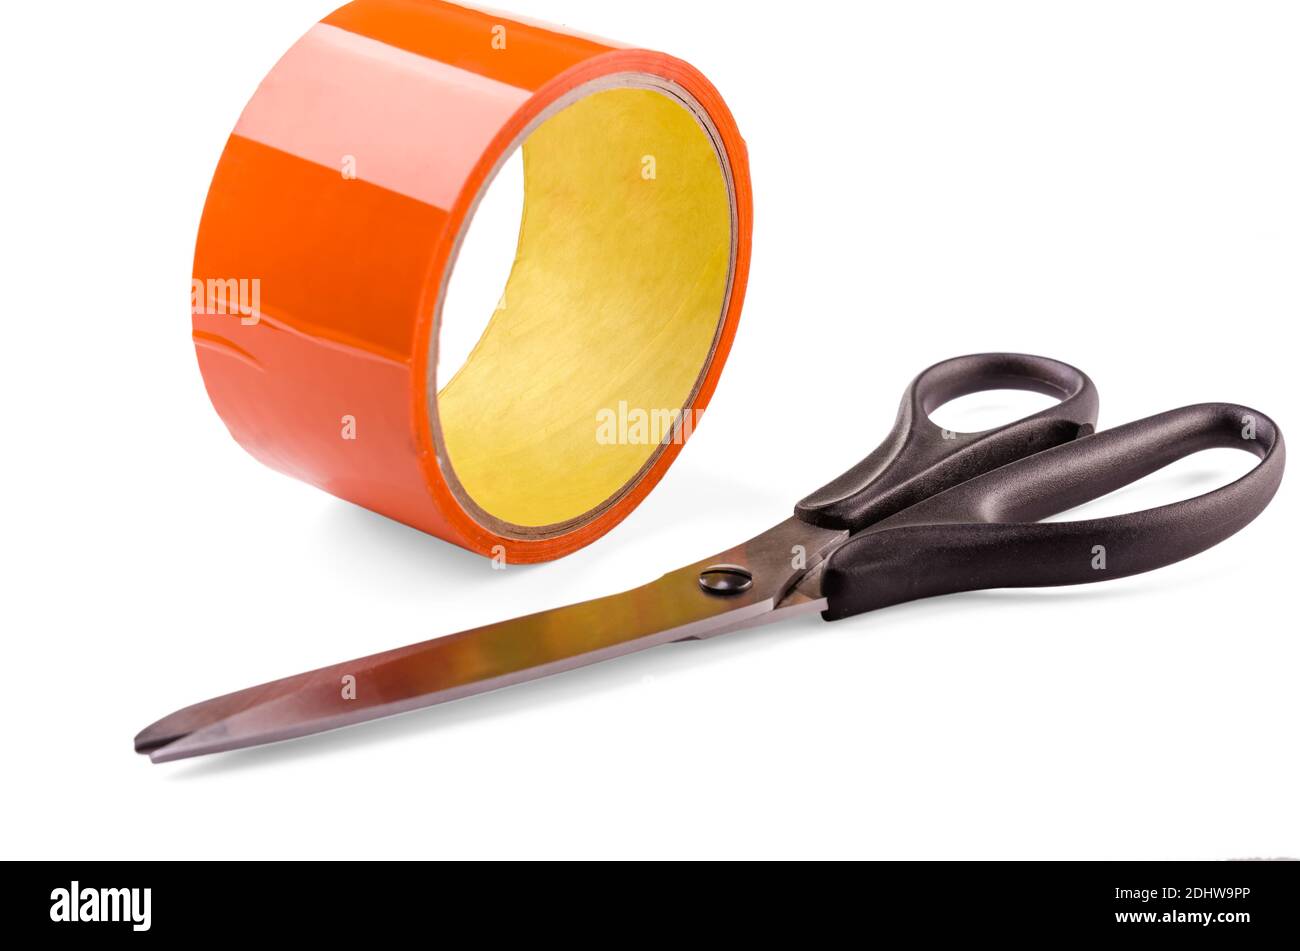 Holiday ScissorTape - Scissors and Tape All-In-One